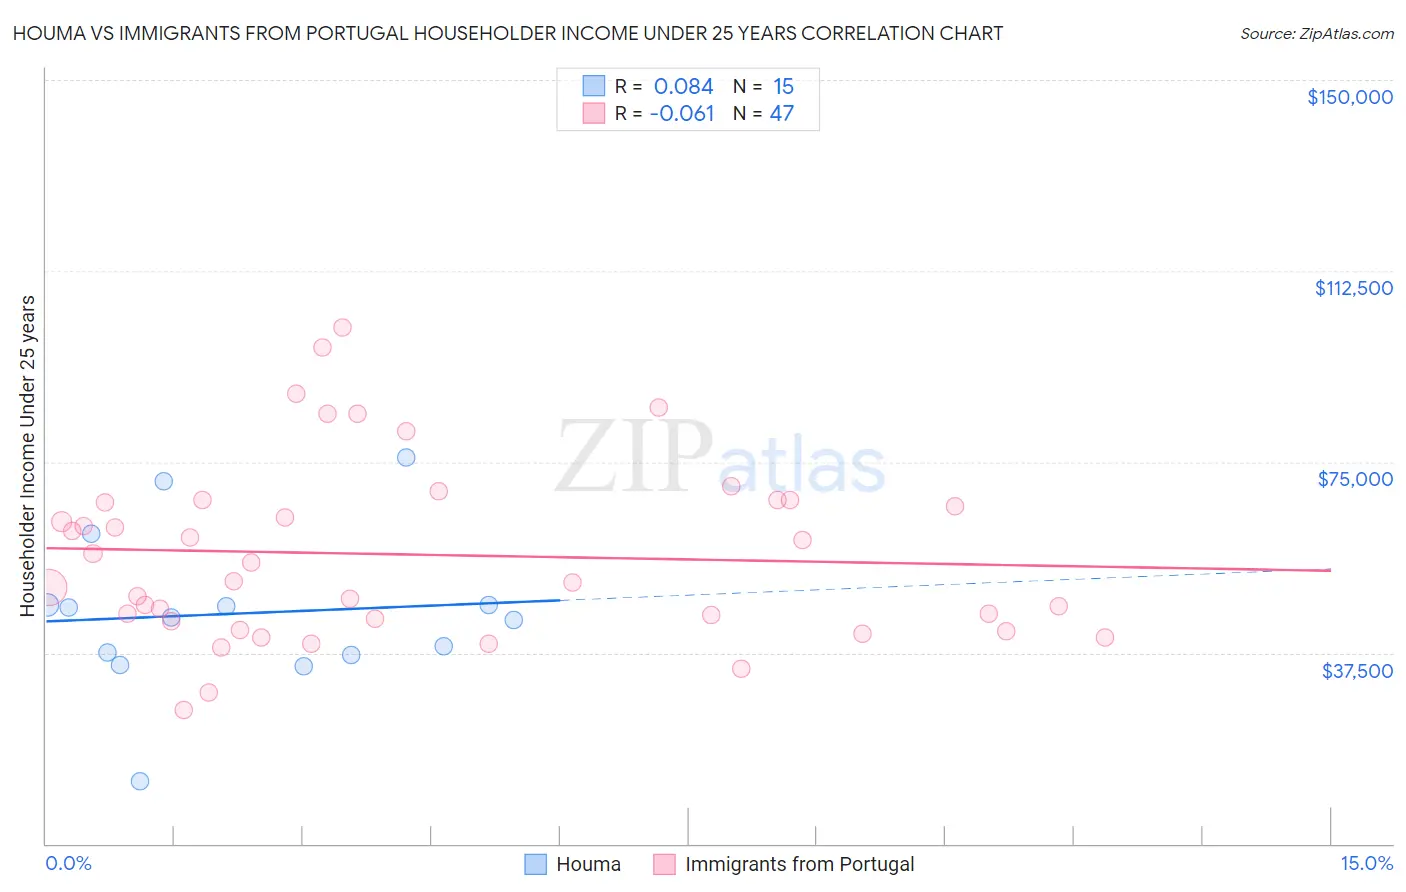 Houma vs Immigrants from Portugal Householder Income Under 25 years